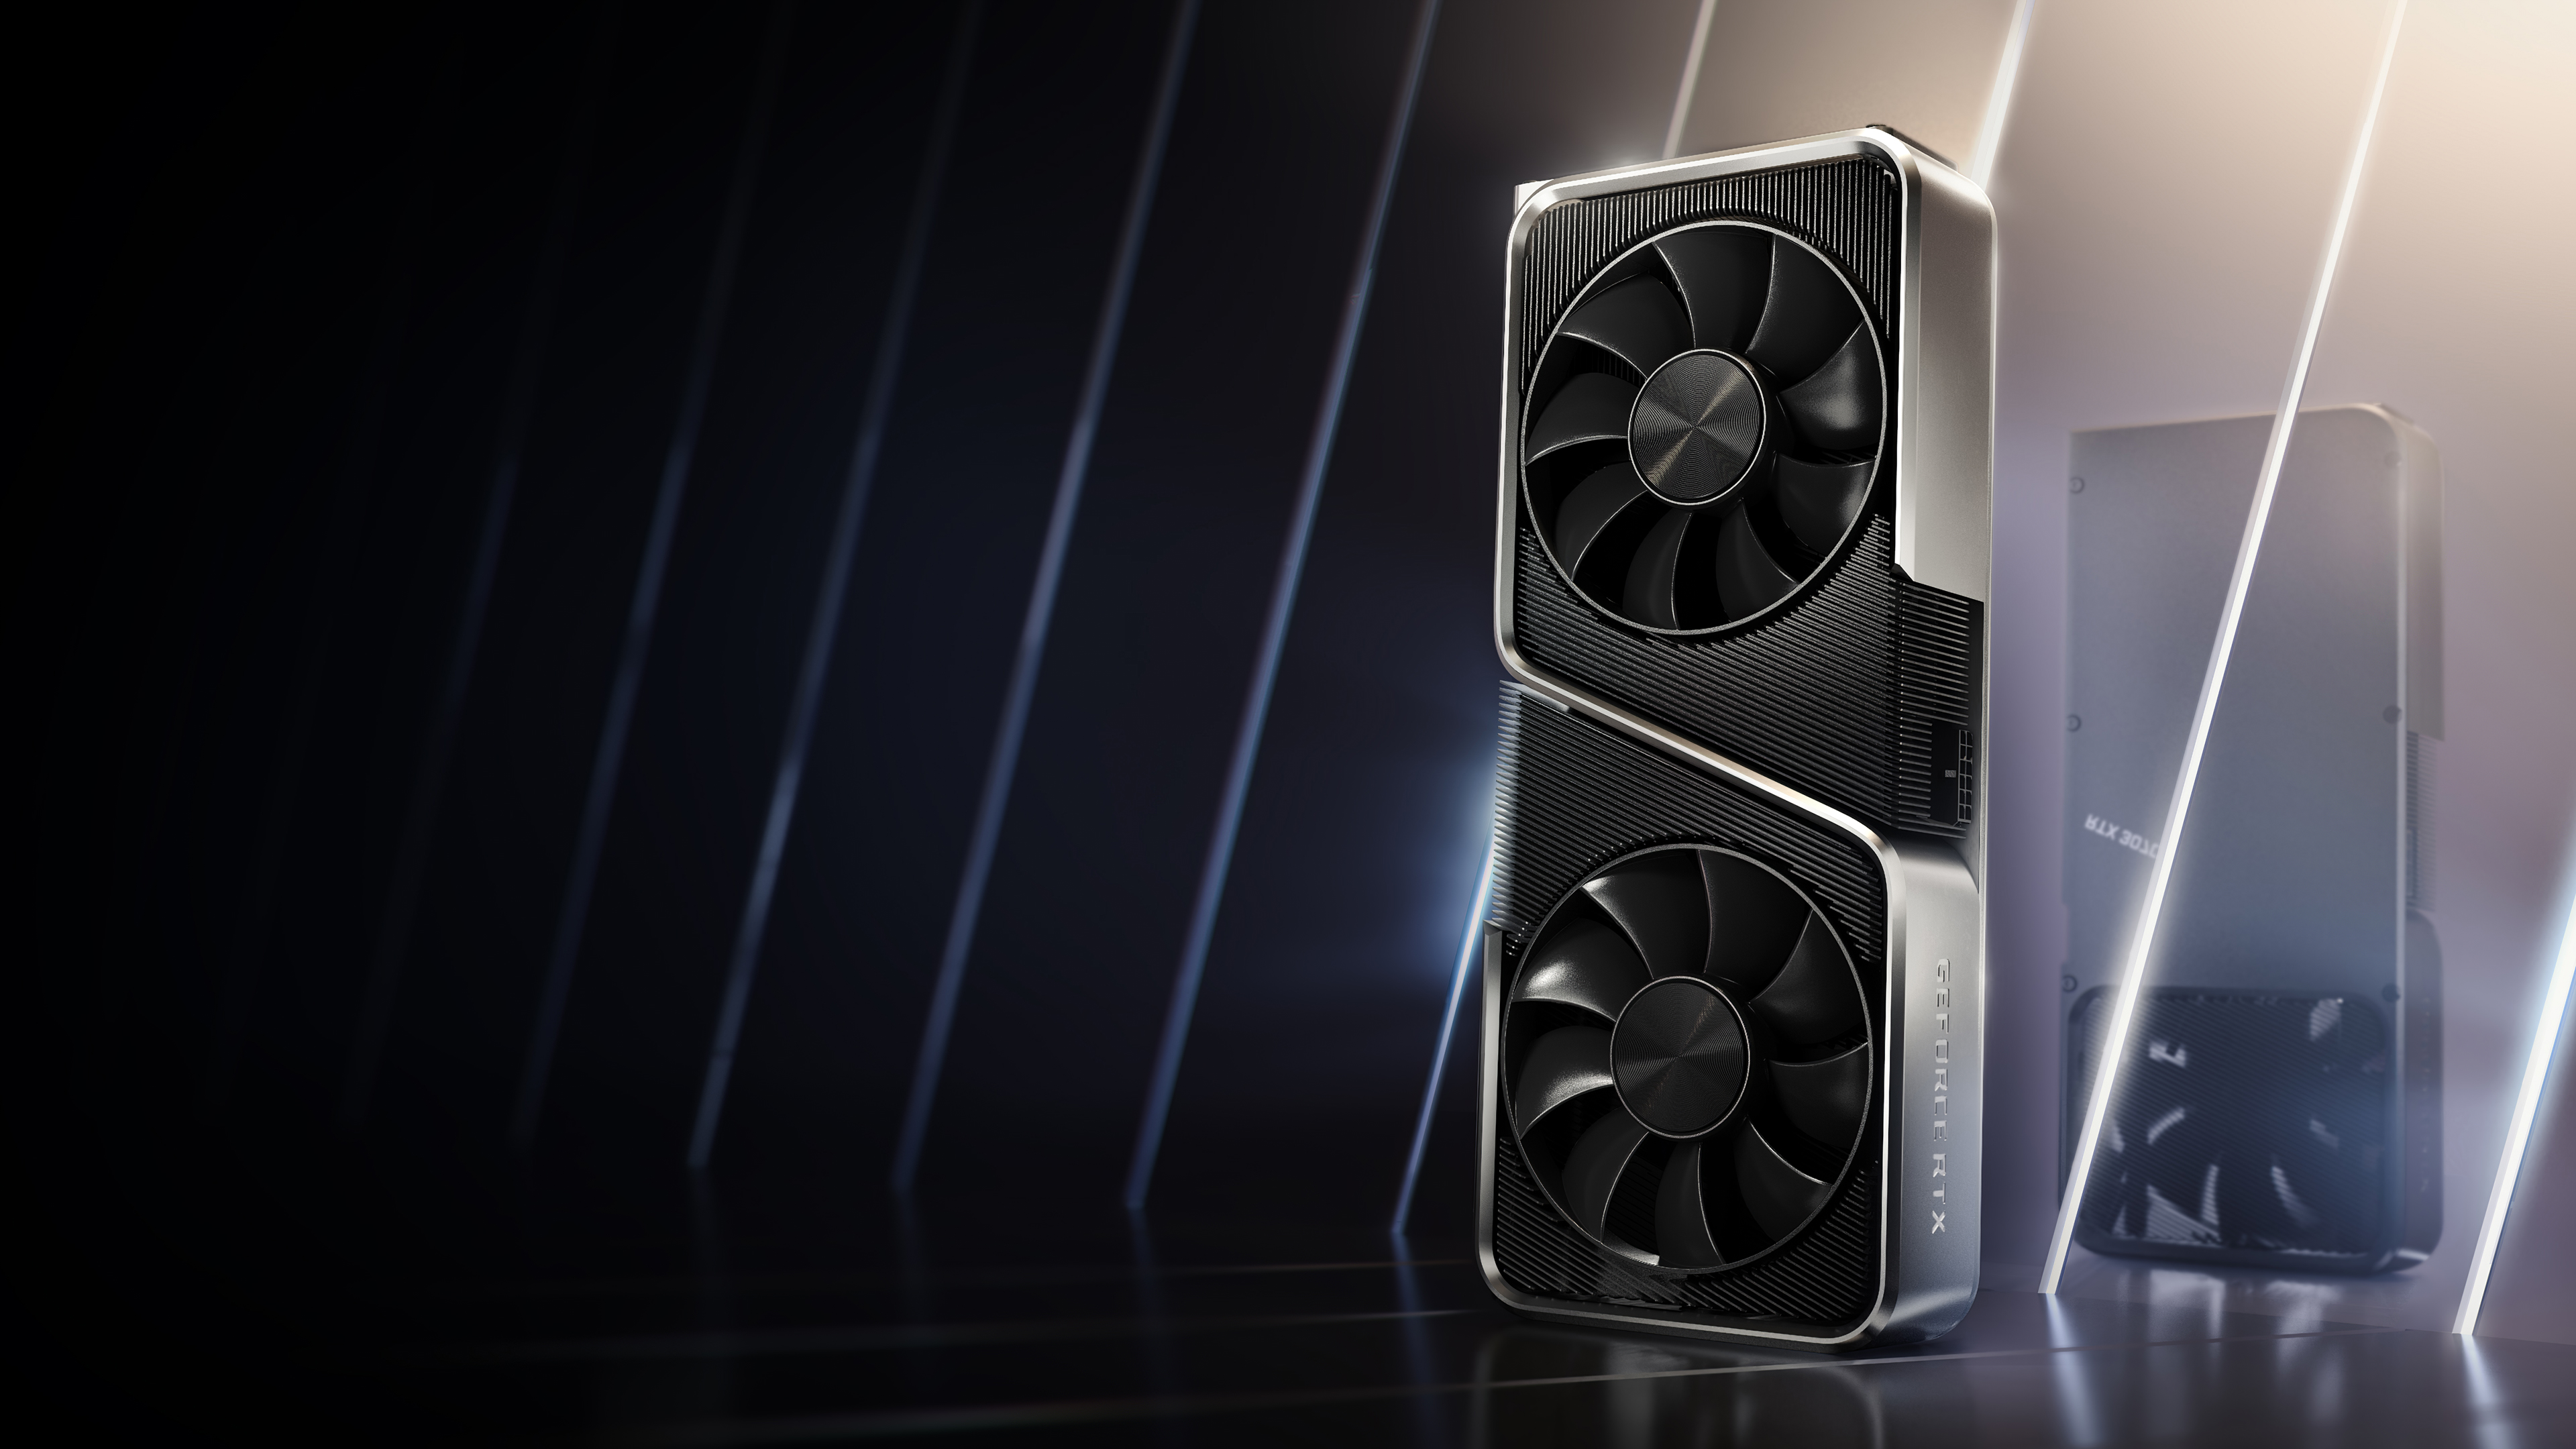 NVIDIA GeForce RTX™ 3070 graphics card offered as prizes for the Unity 23.1 beta